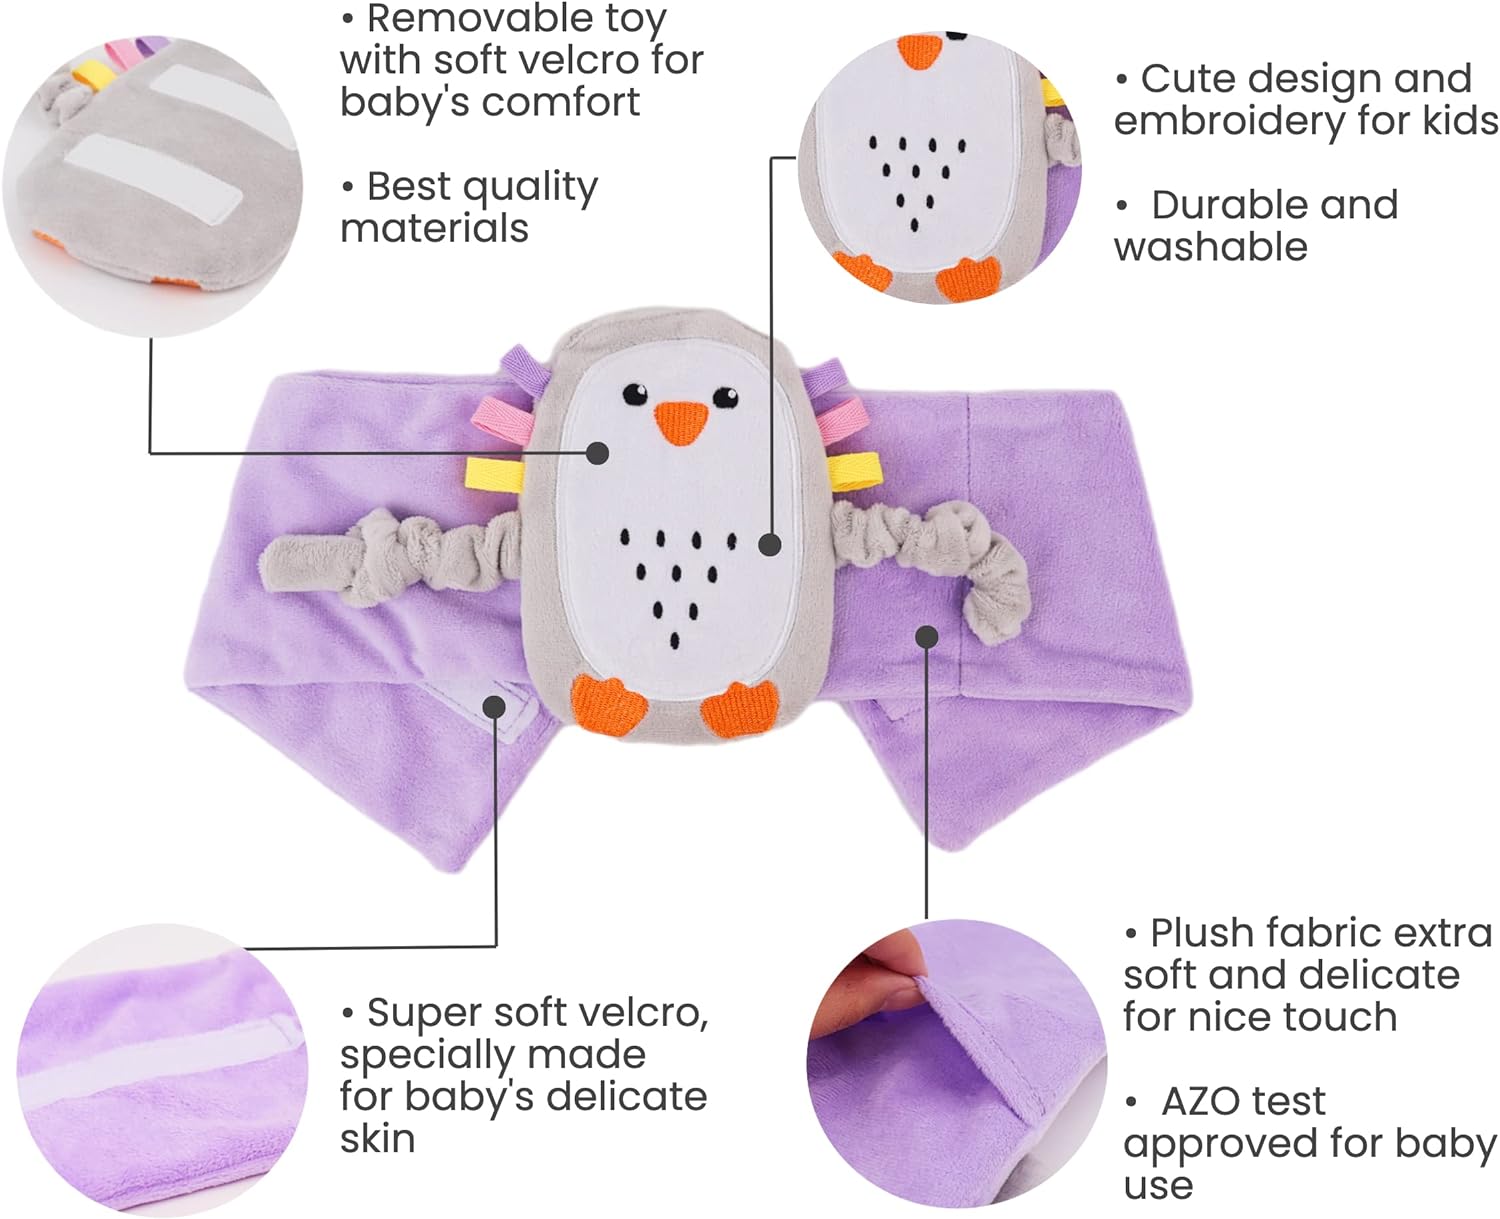 Superse Colic and Gas Relief for Newborns - Colic Calm Baby Heating Pad Belly Band for Upset Stomach and Baby Reflux - Warm Aroma Stomach Band for Fussy Infant Gas with Washcloth (Purple Penguin)